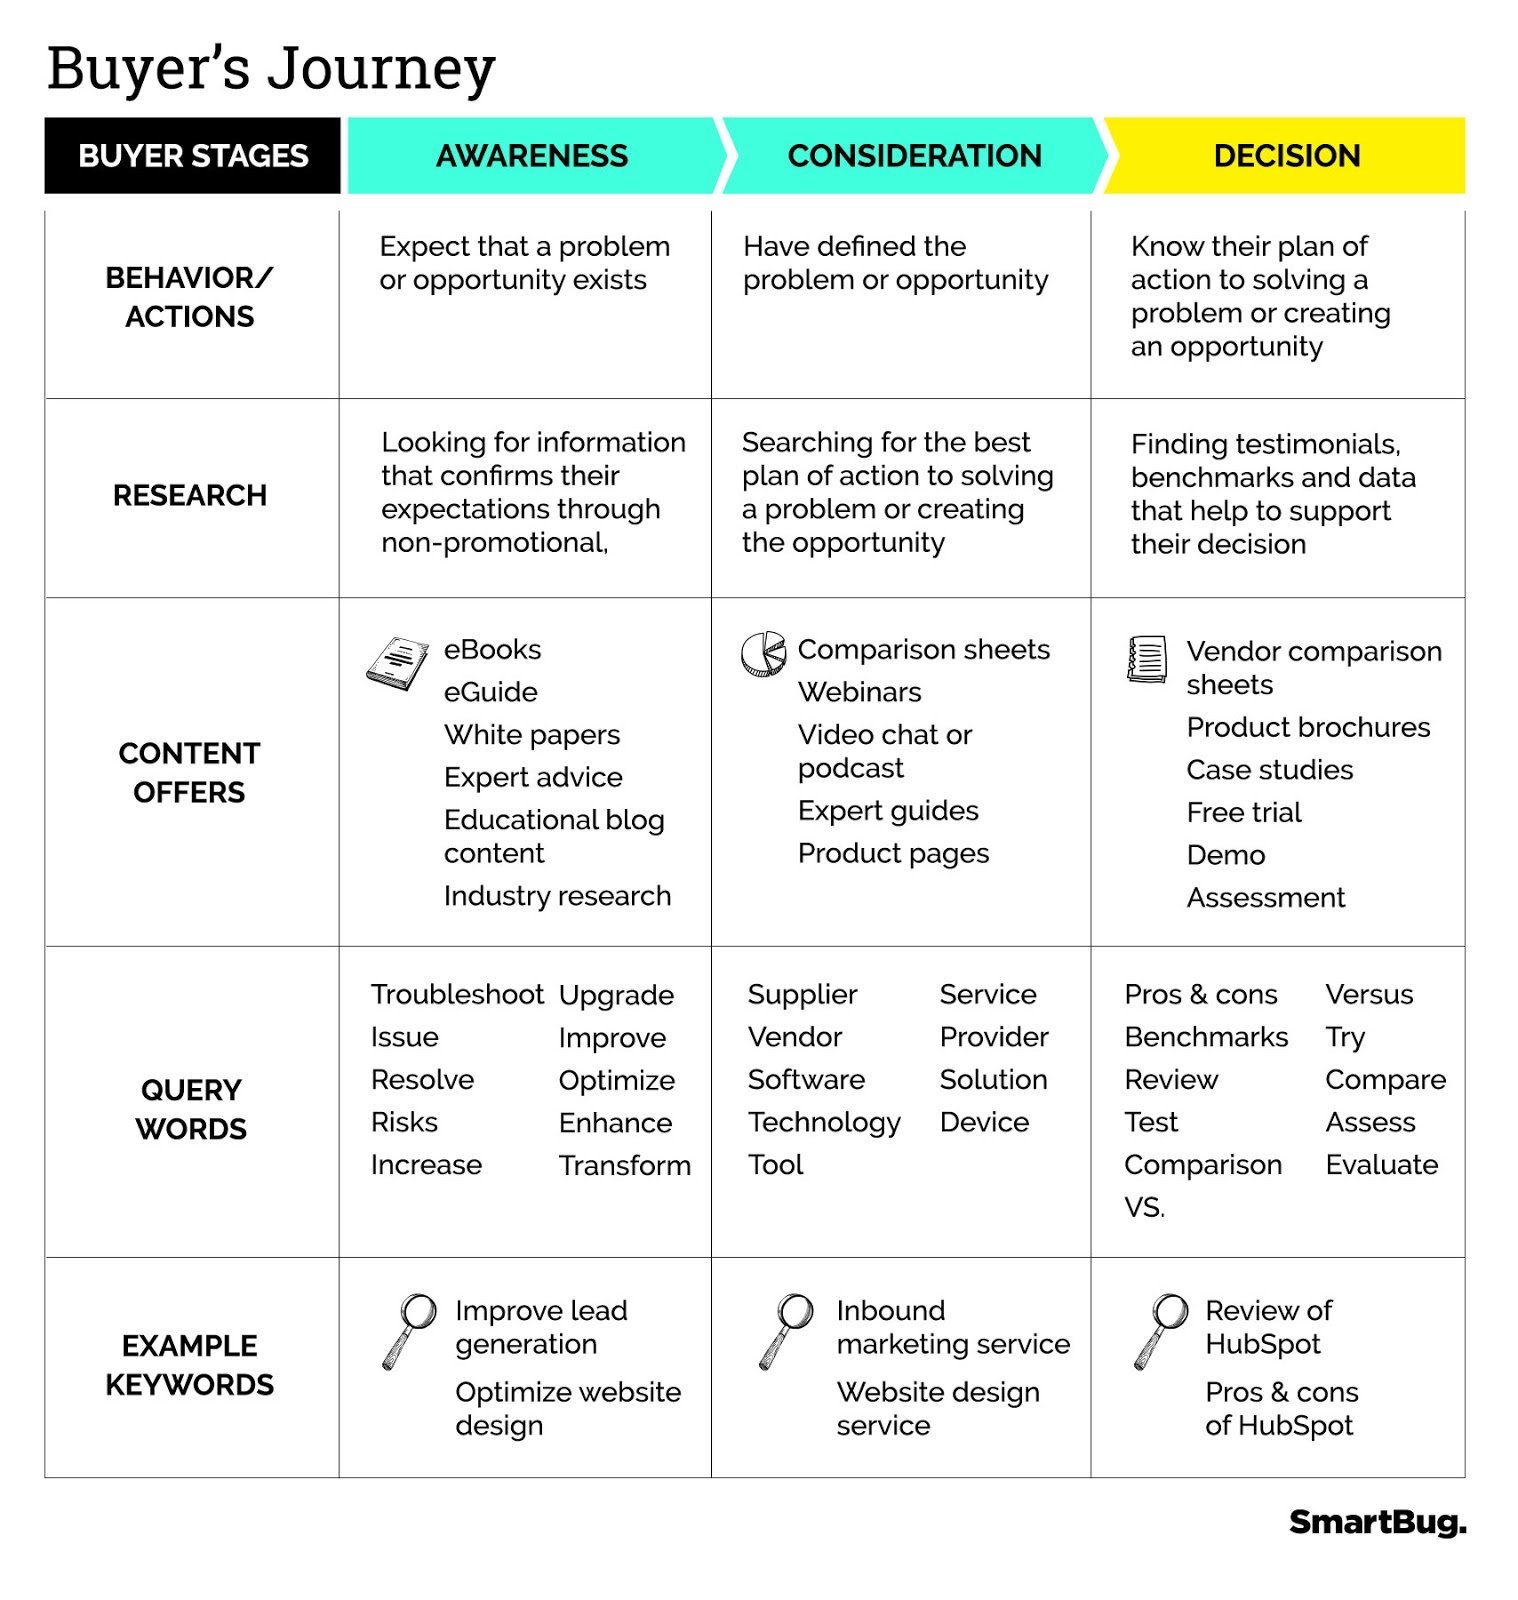 A graph of the typical buyer’s journey